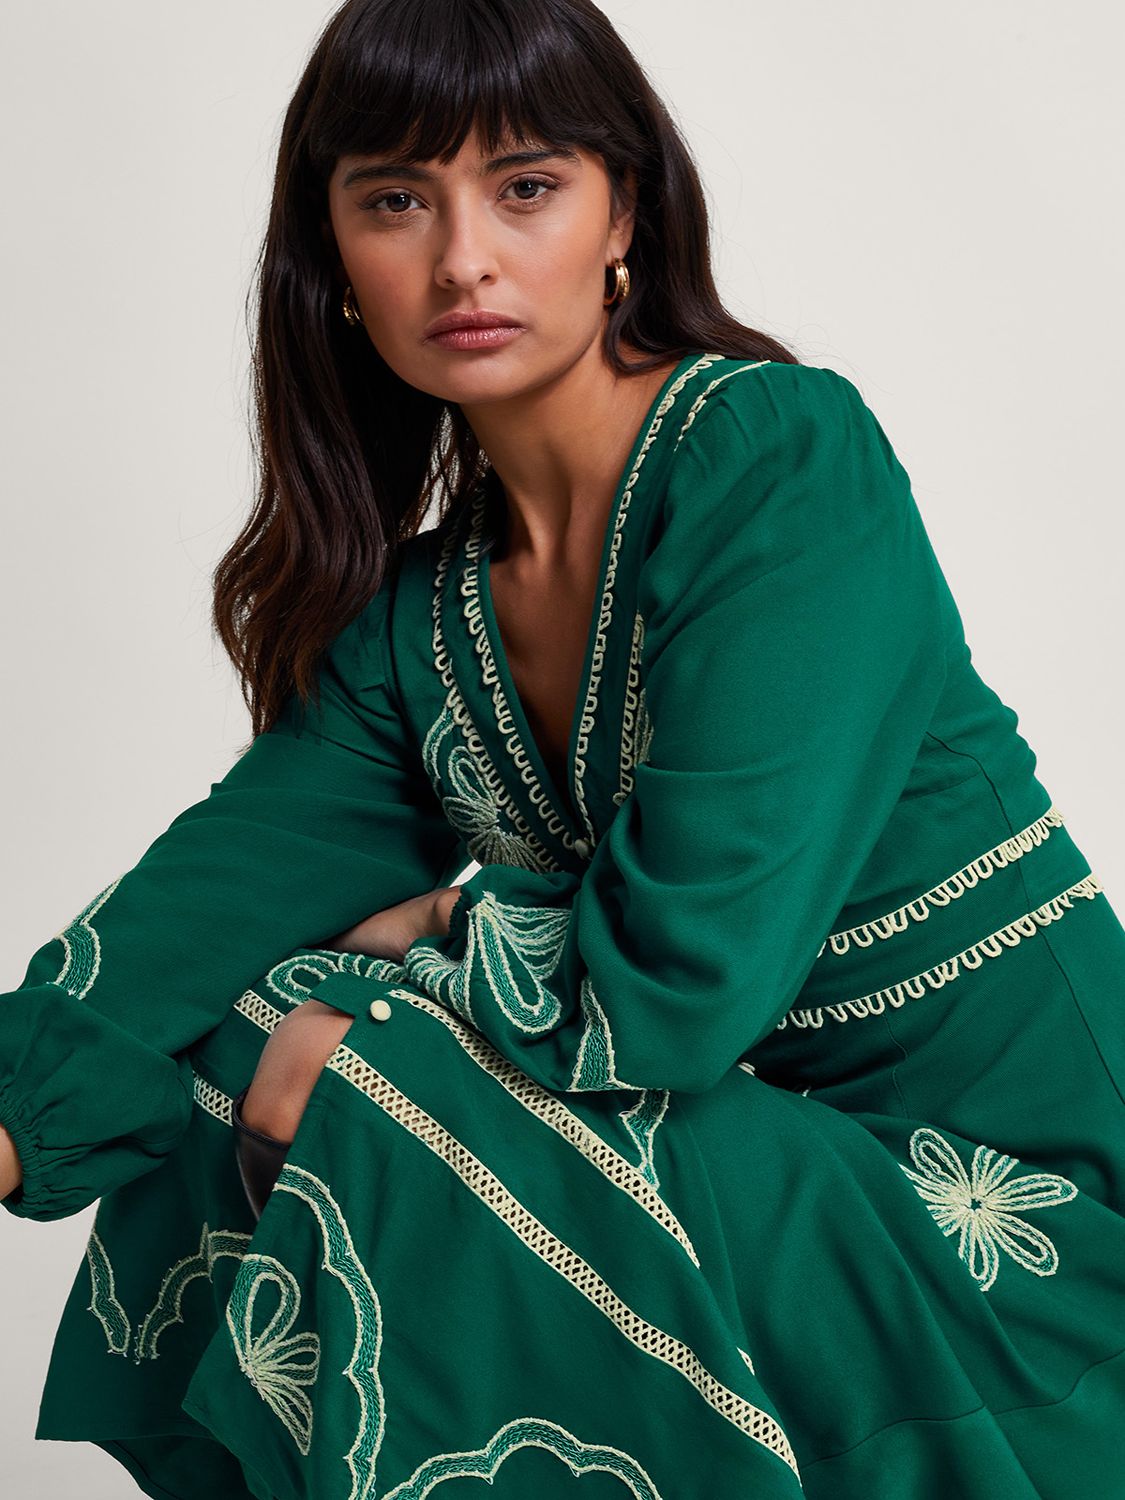 Buy Monsoon Clio Embroidered Midi Dress, Green Online at johnlewis.com